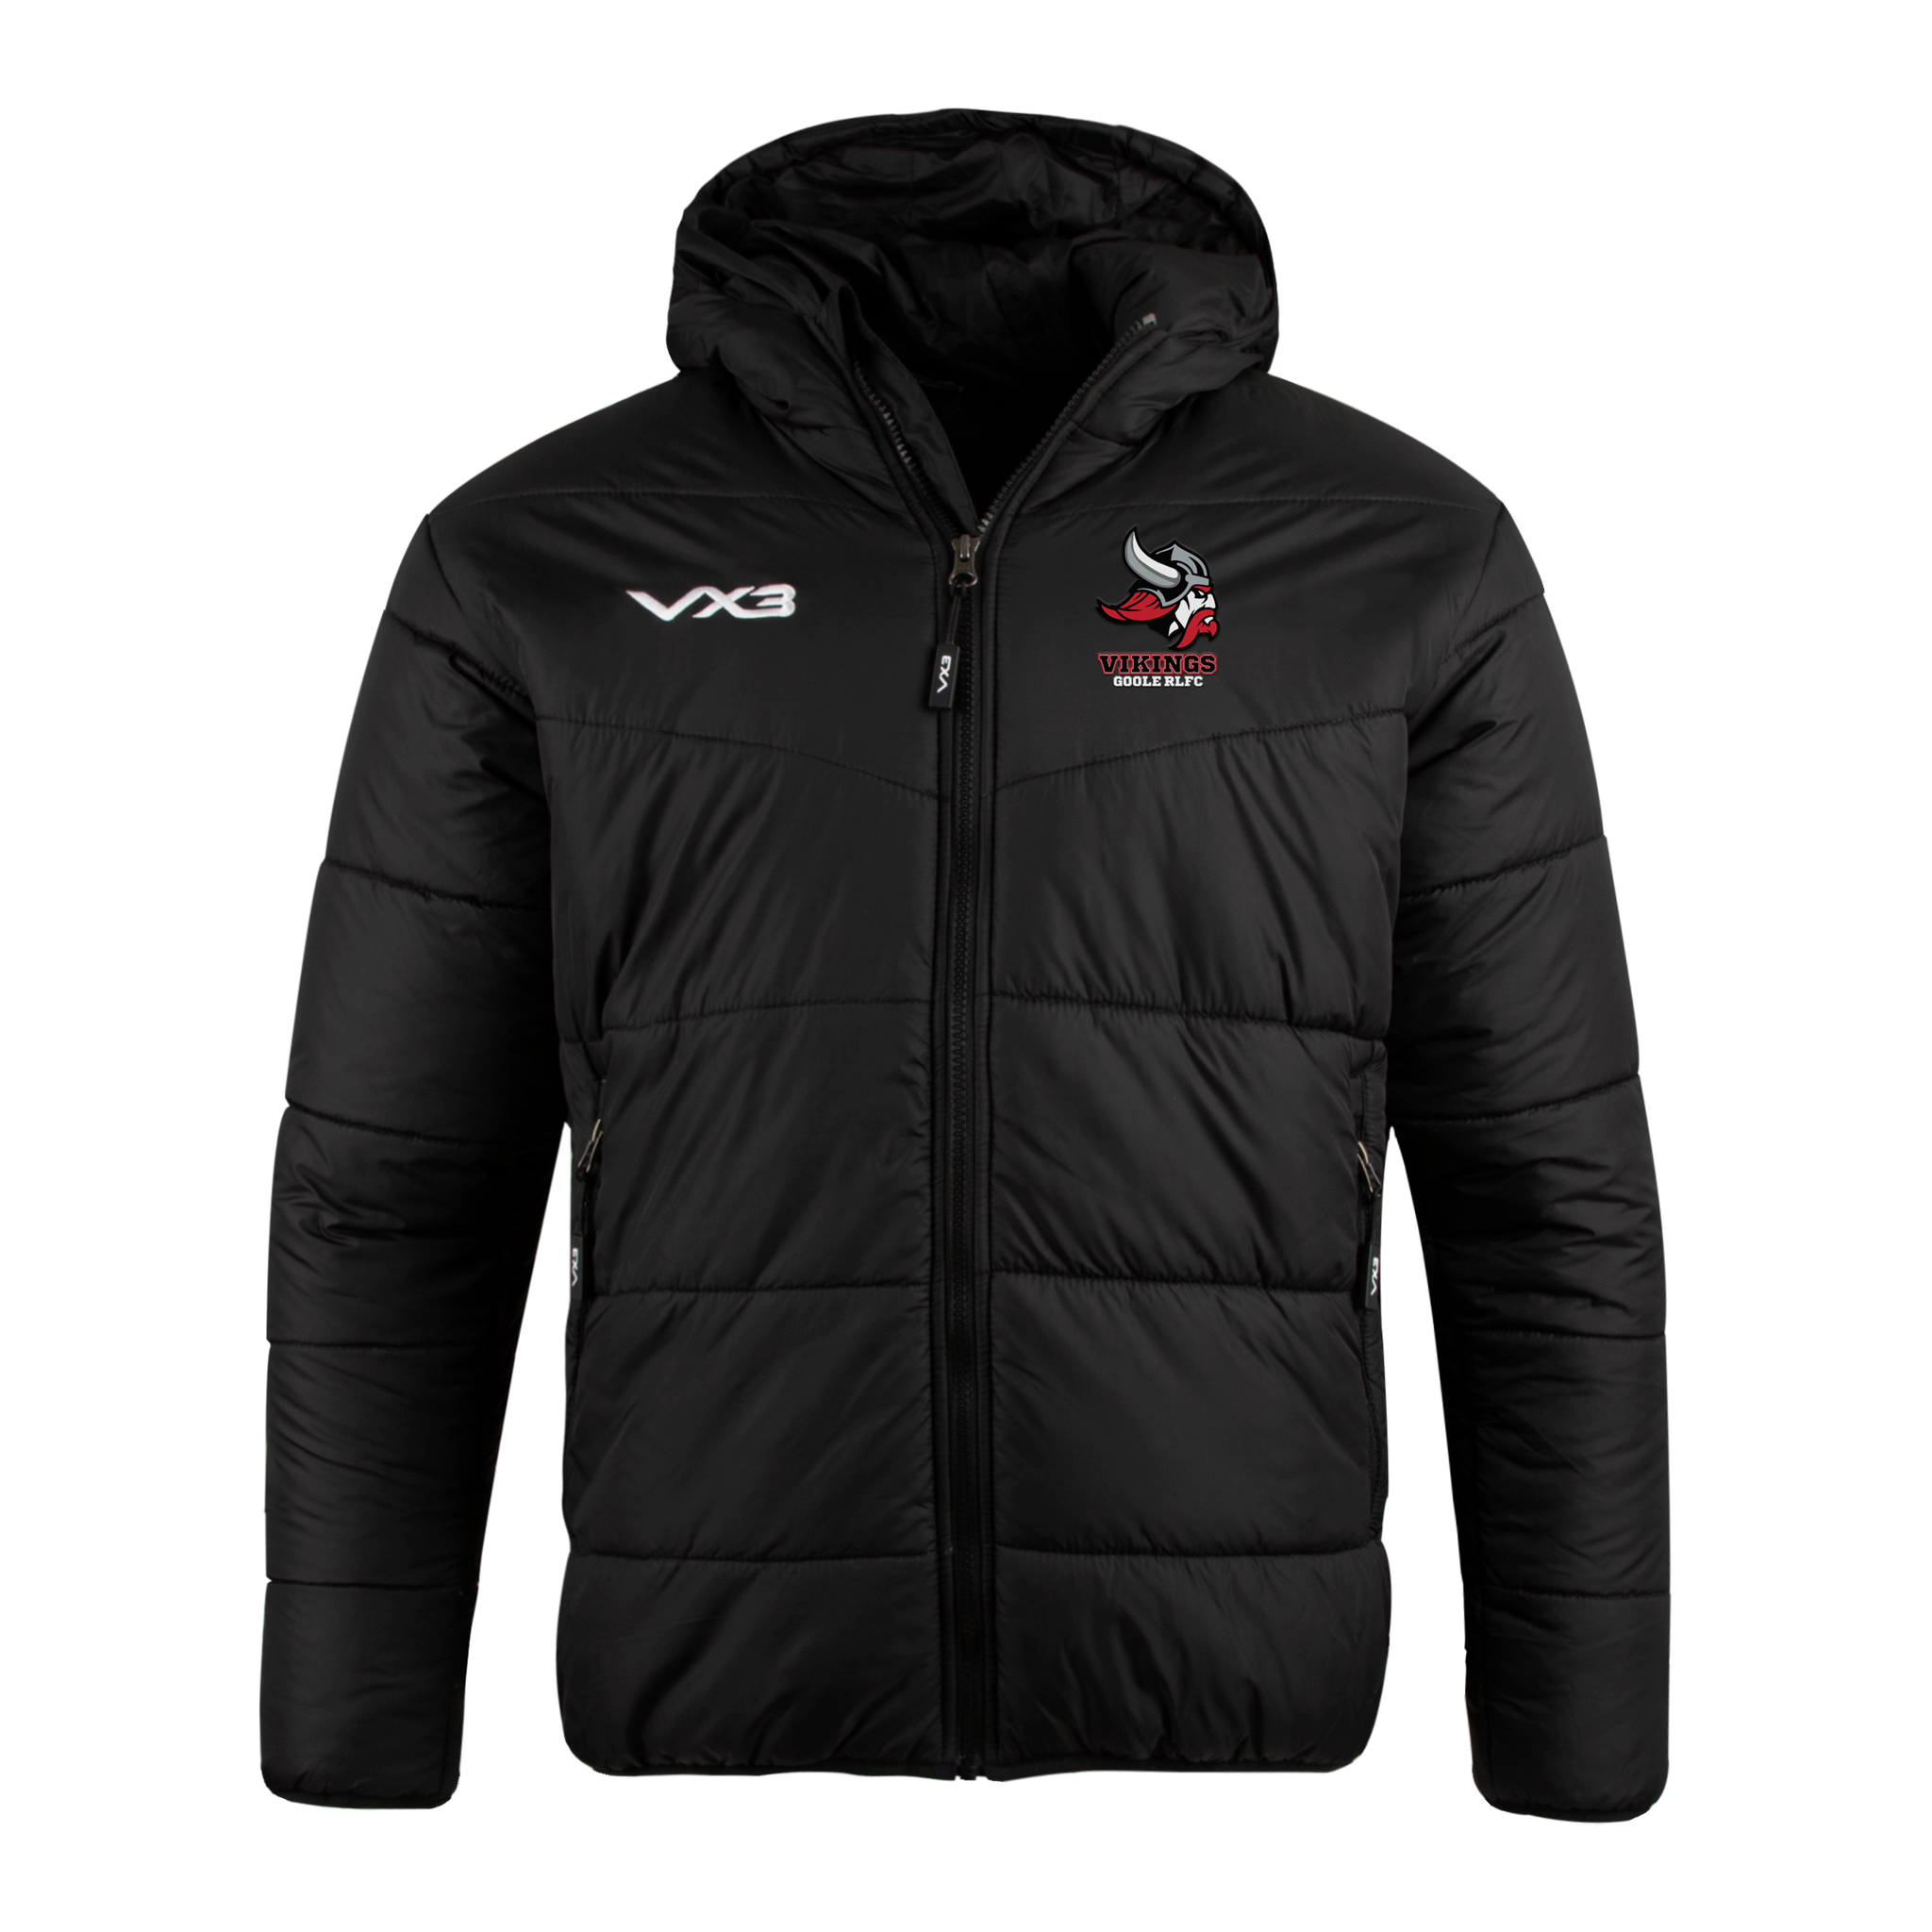 Goole Viking ARLFC Lorica Youth Quilted Jacket